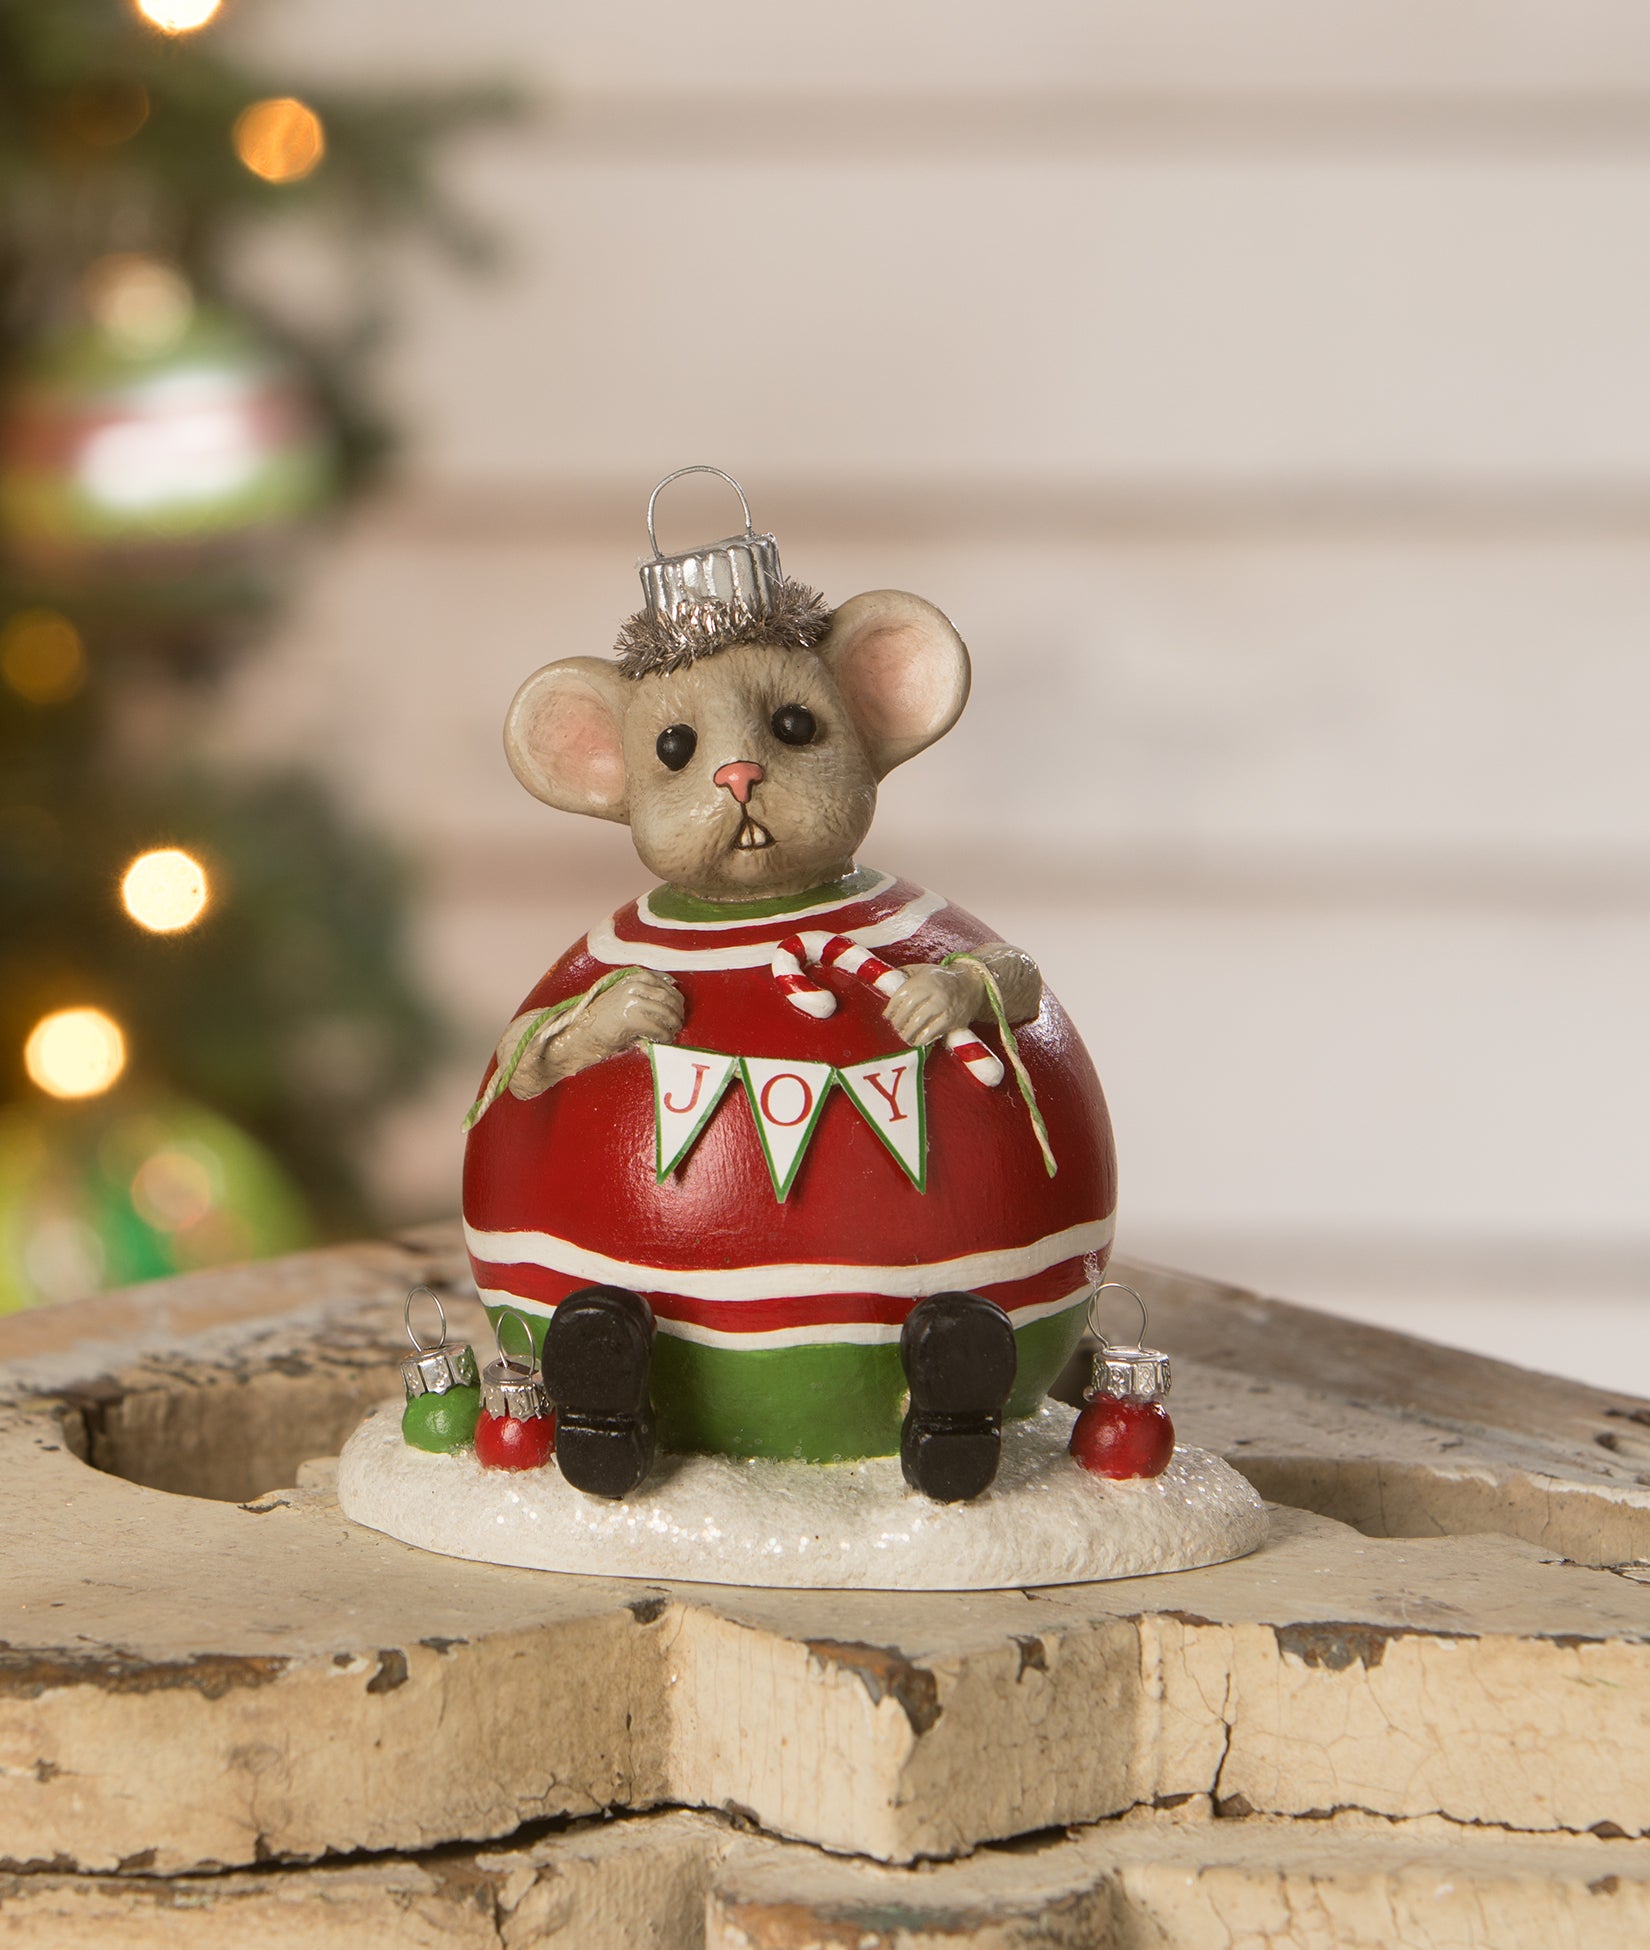 Nibbles Mouse in Ornament Figurine by Bethany Lowe